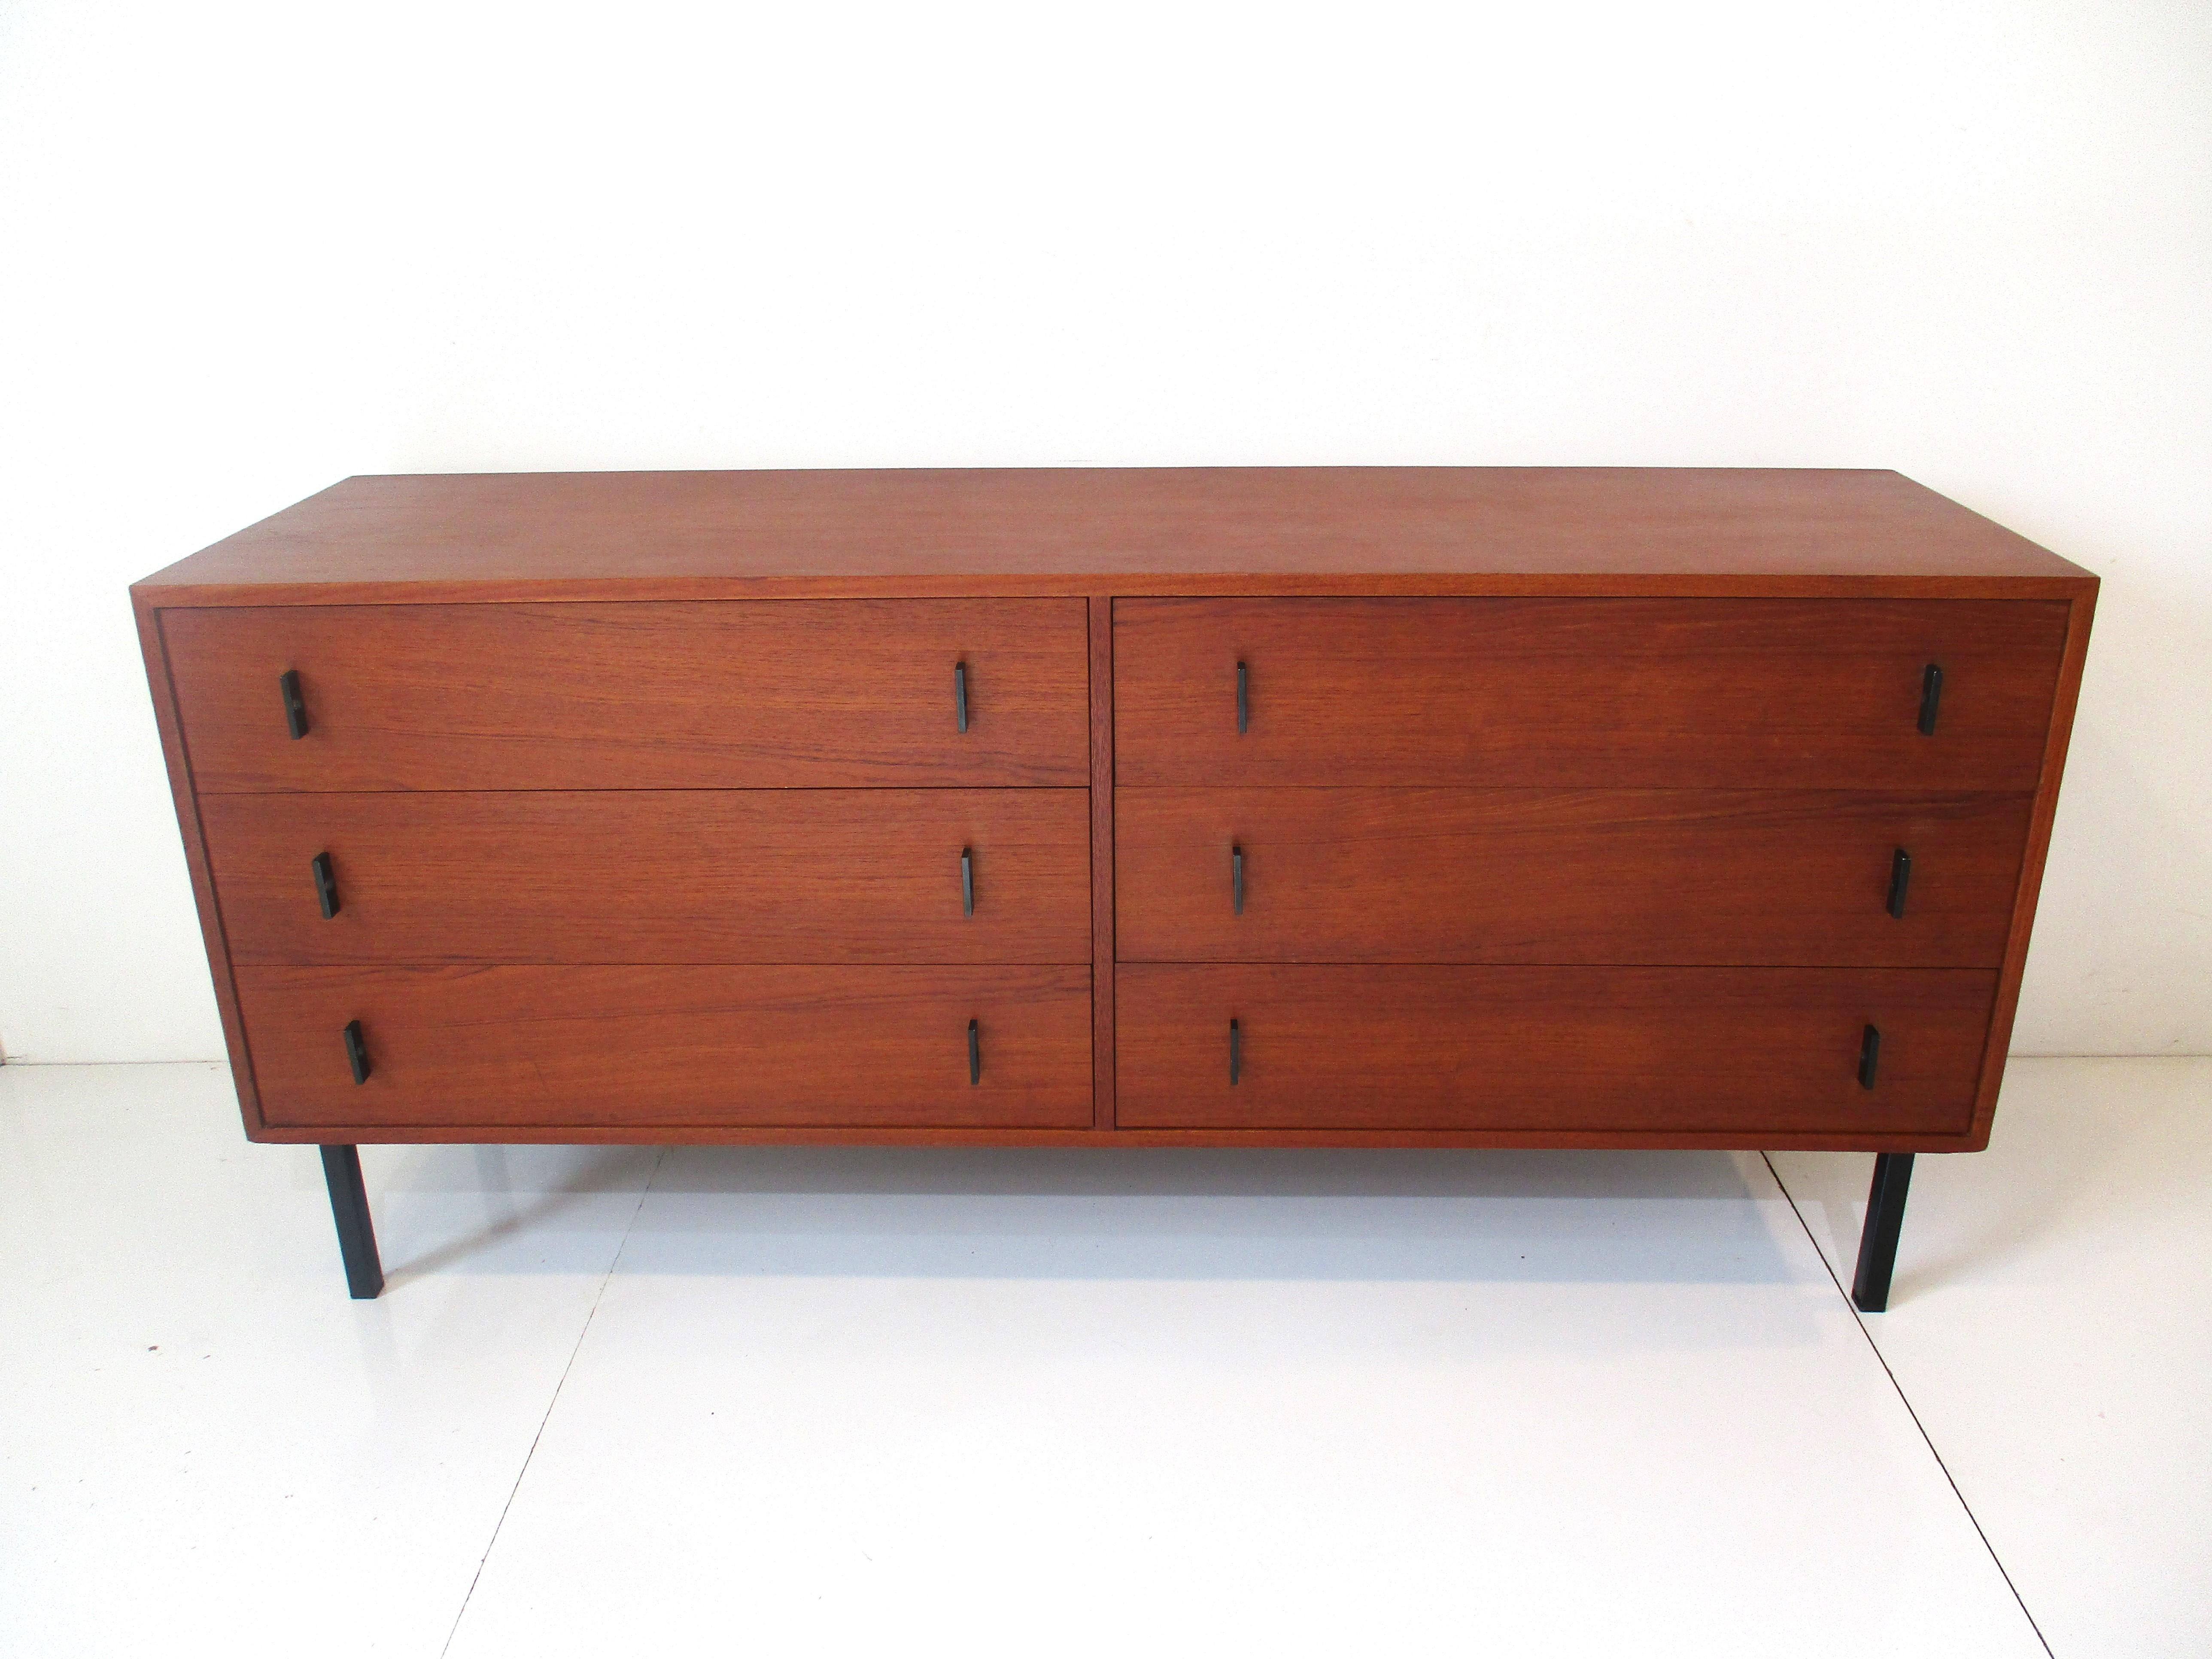 A very well crafted Danish medium dark teak wood six drawer dresser with great graining, stain black metal legs and pulls. Inside it has the contrasting light colored birch wood drawers with dovetail construction.